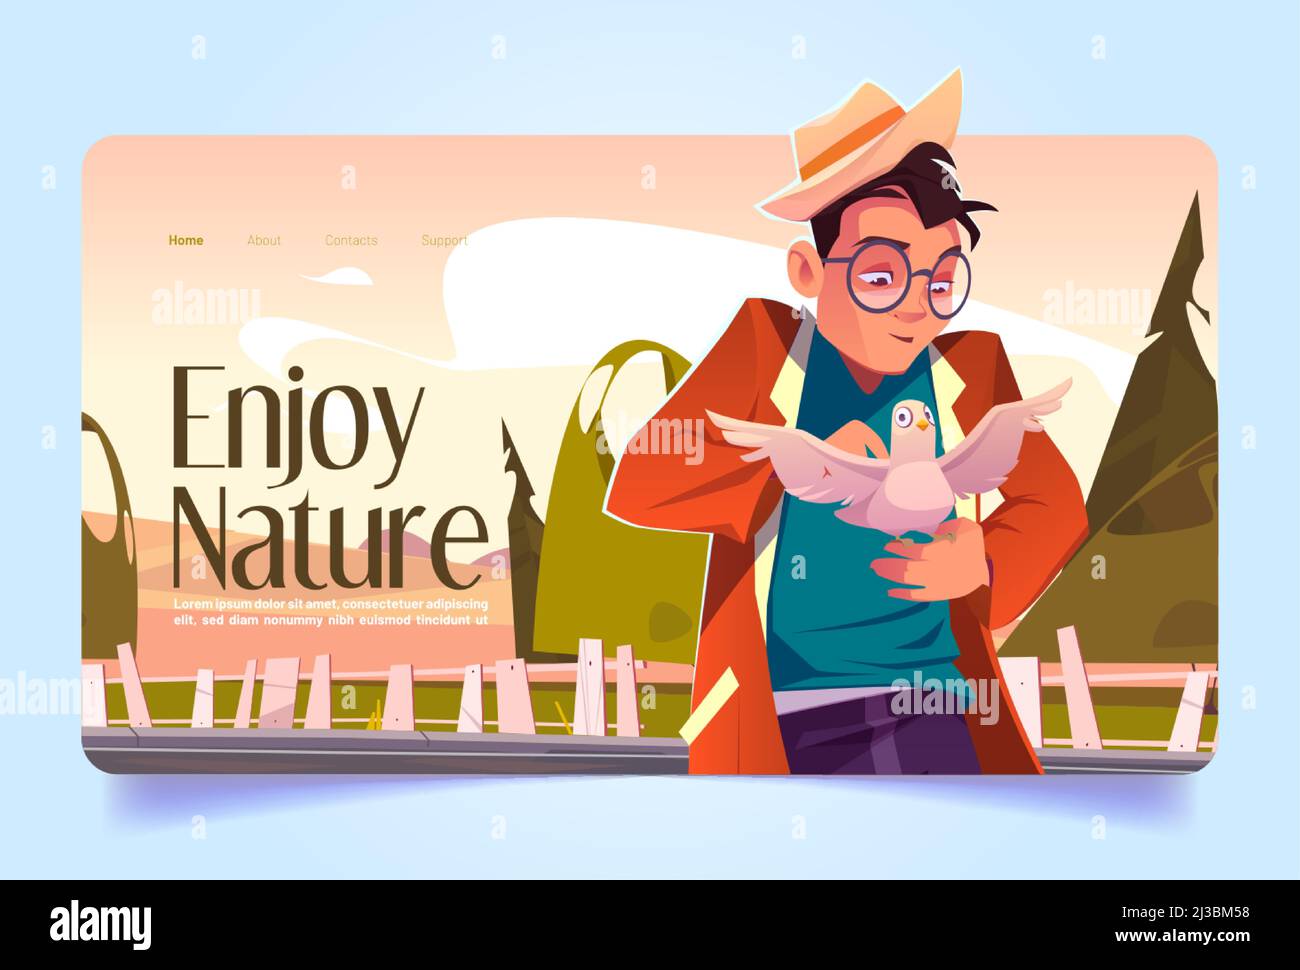 Enjoy nature banner with man caress white dove. Vector landing page with cartoon illustration of character in hat and glasses holding pigeon on hand i Stock Vector